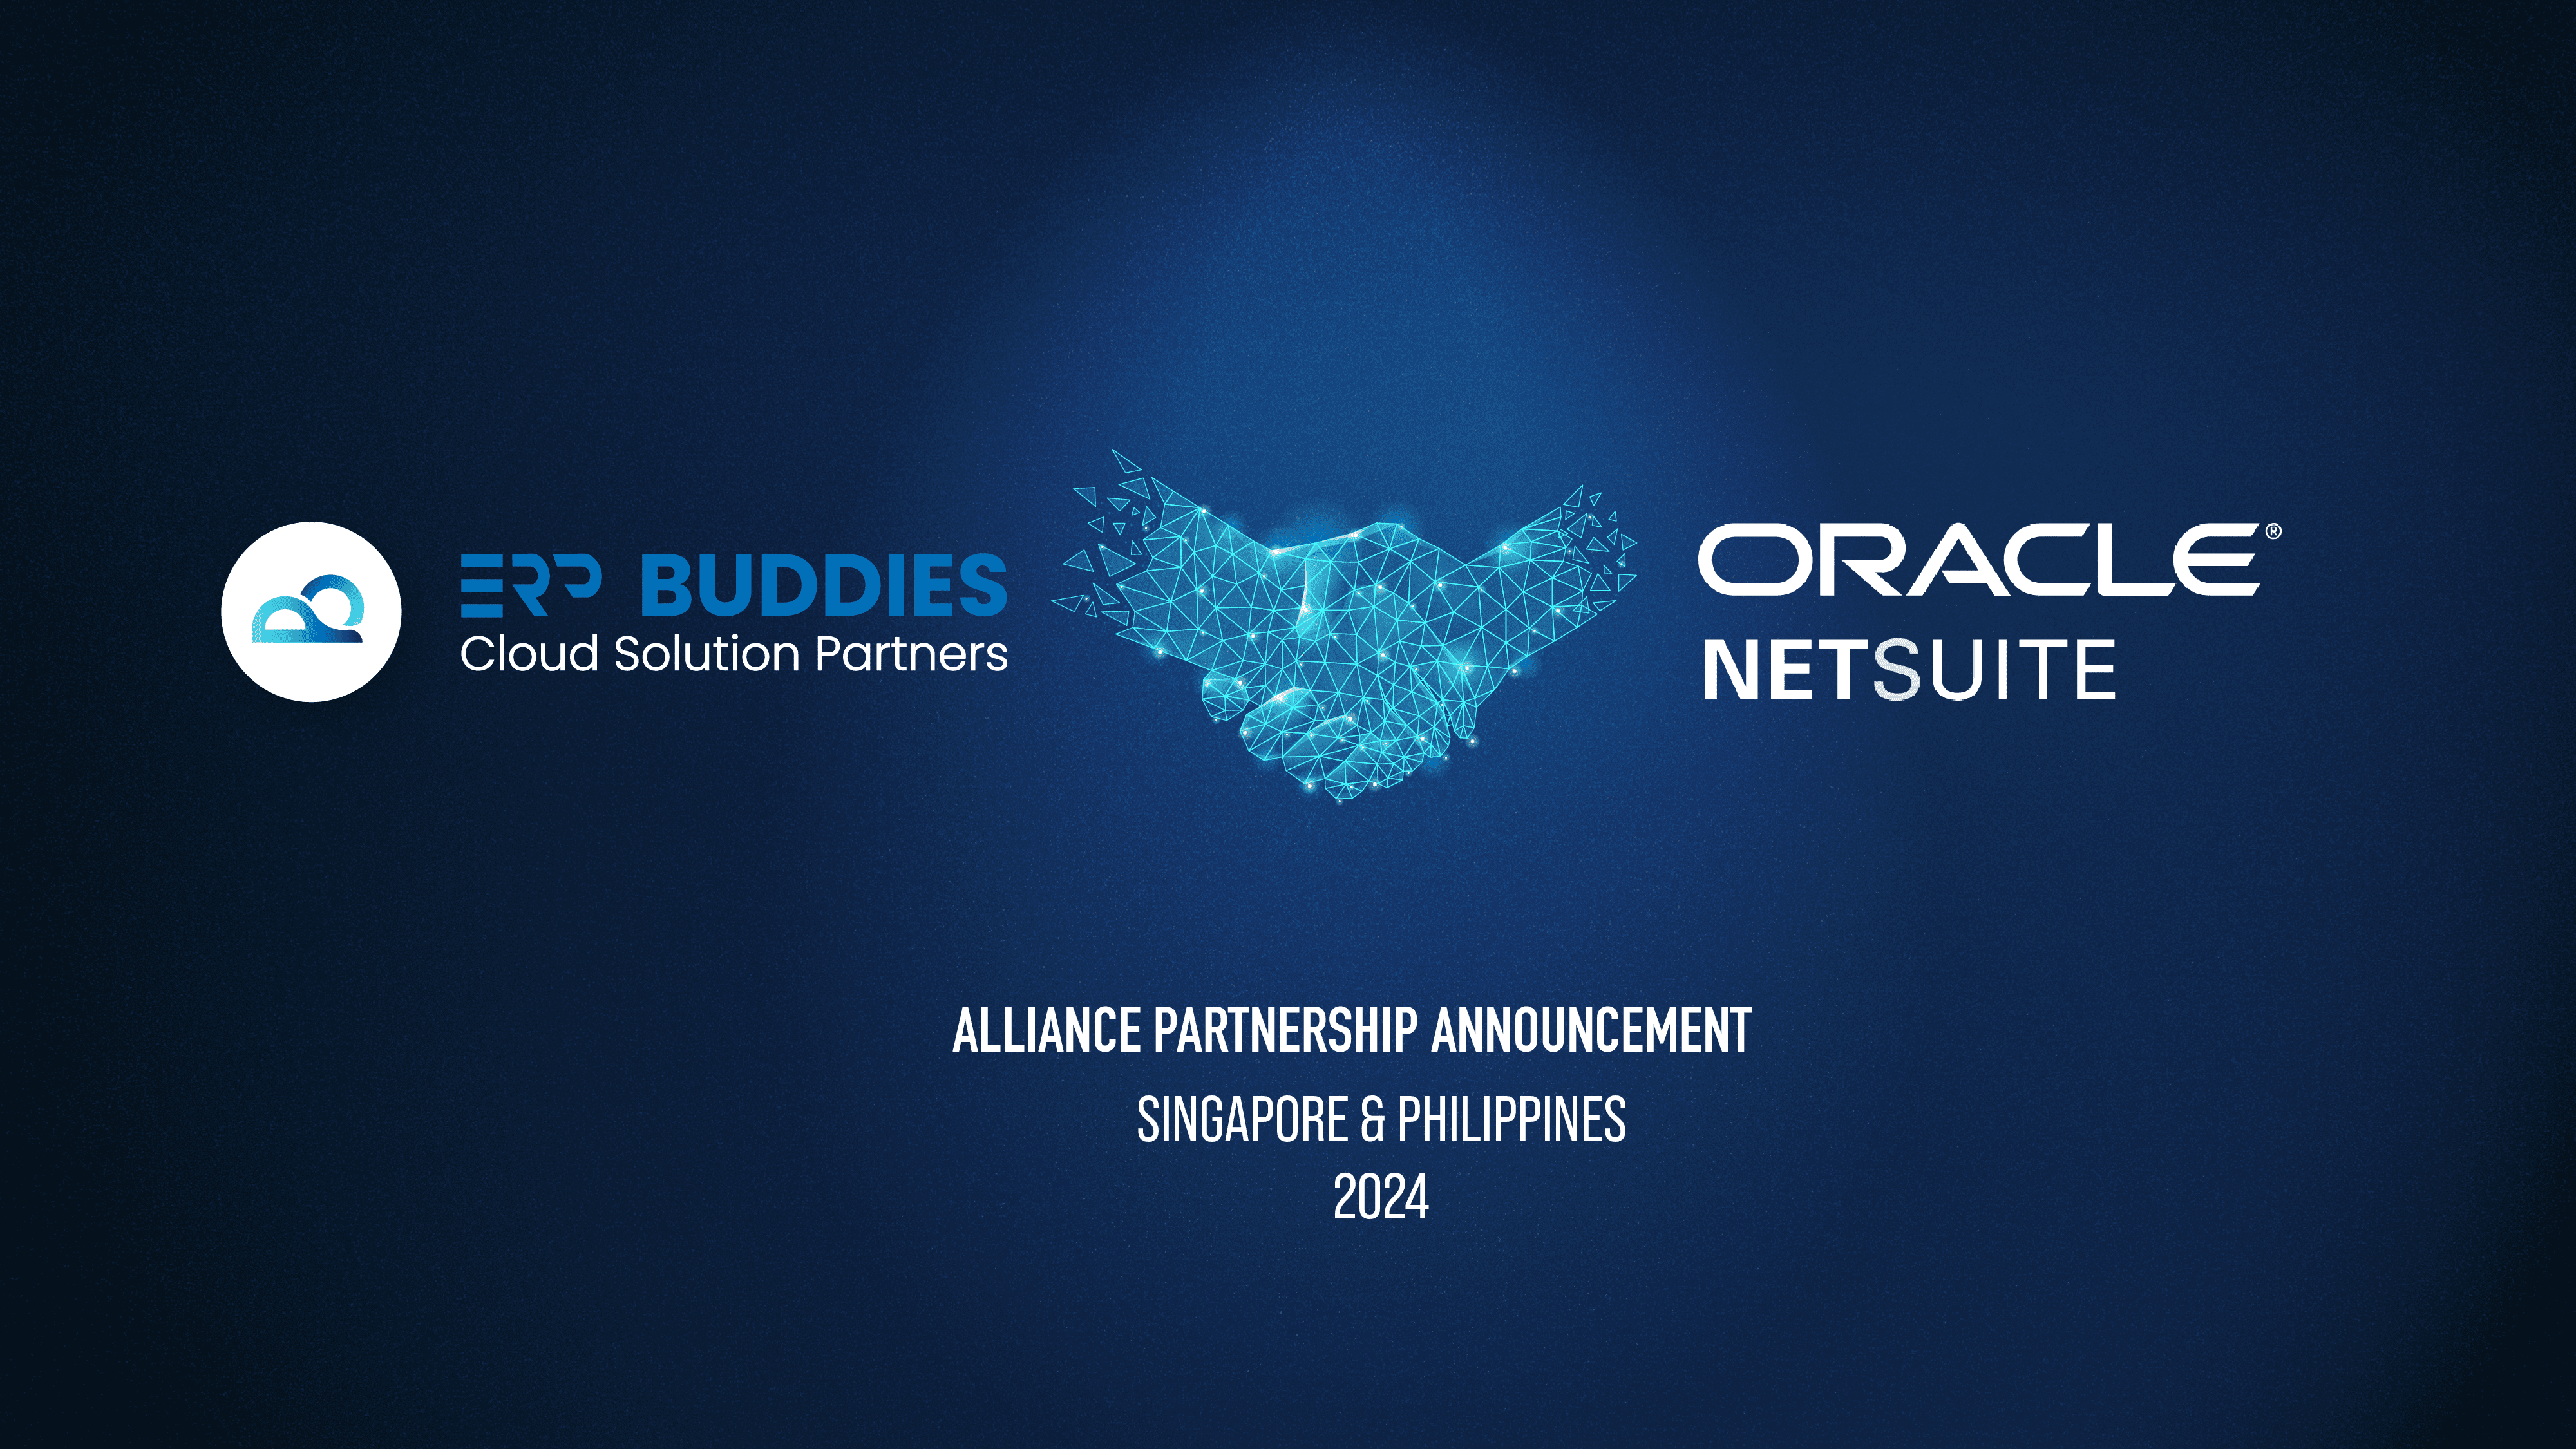 ERP Buddies Secures Alliance Partnership with Oracle NetSuite in the Philippines and Singapore 